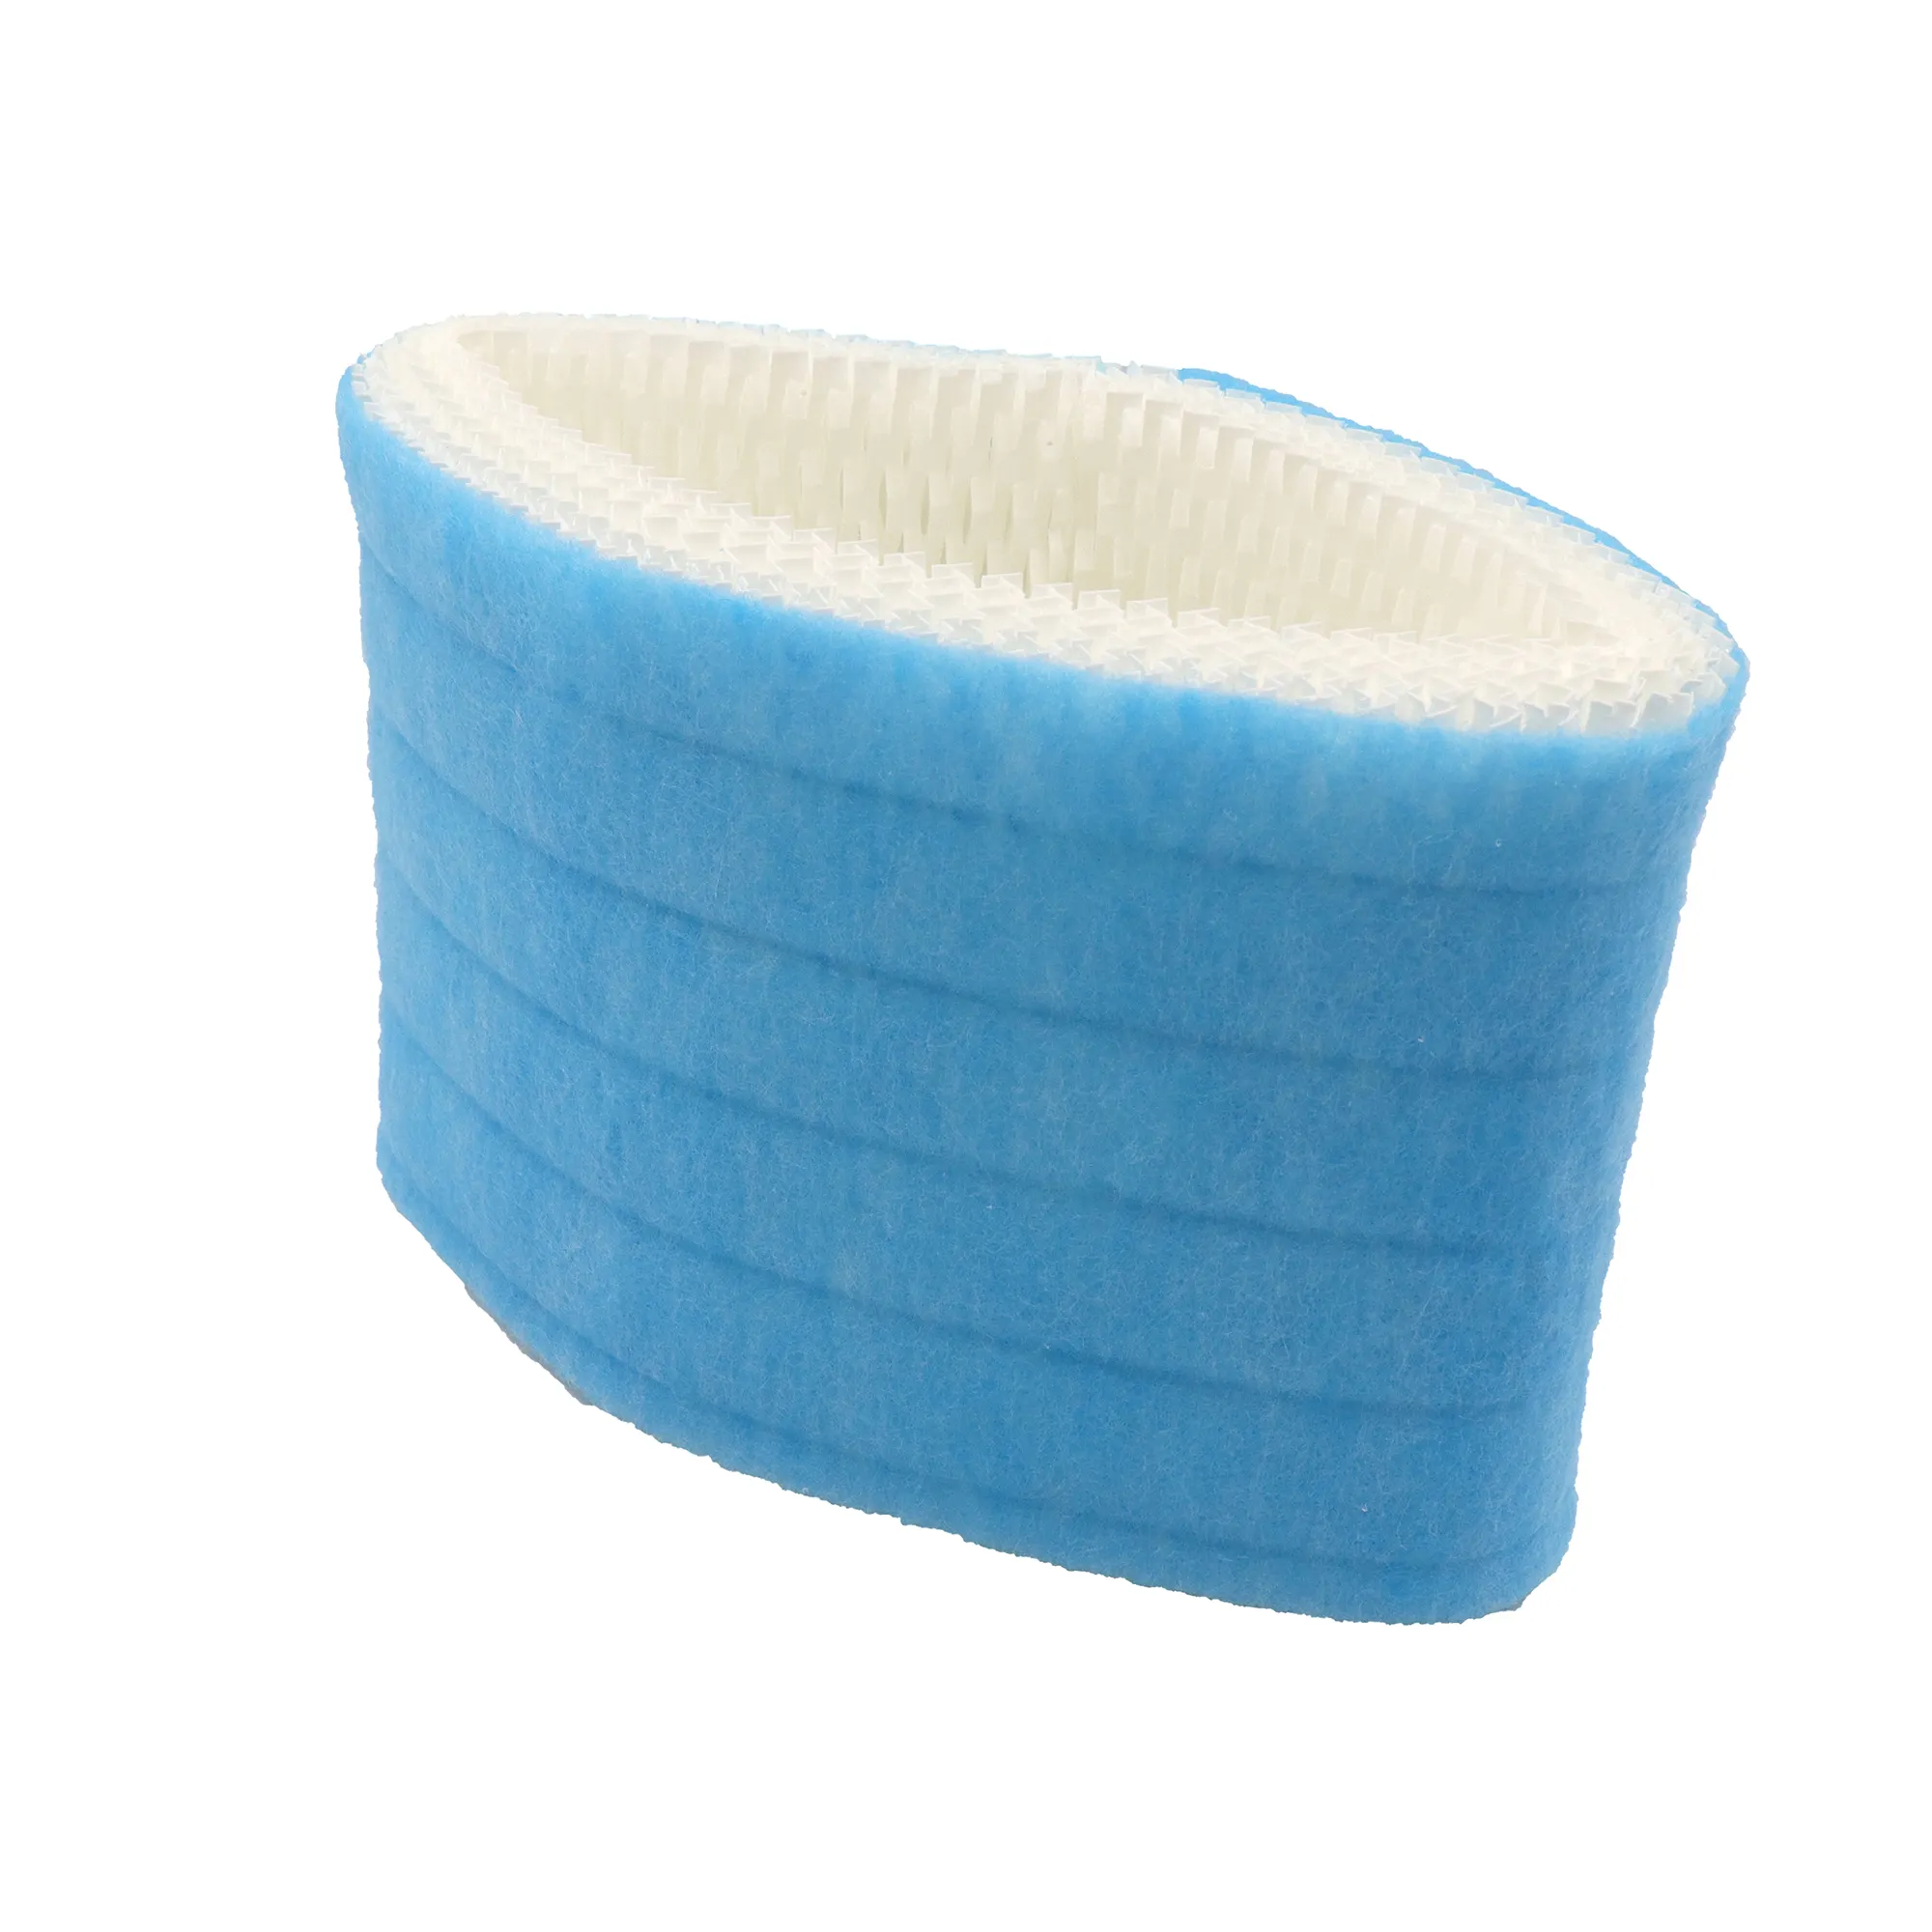 Humidifier Filters Replacement for Honeywells HAC-504 HAC-504AW HAC504V1 HCM-350 HCM-300T HCM-600 HCM-710 HCM-315T filters